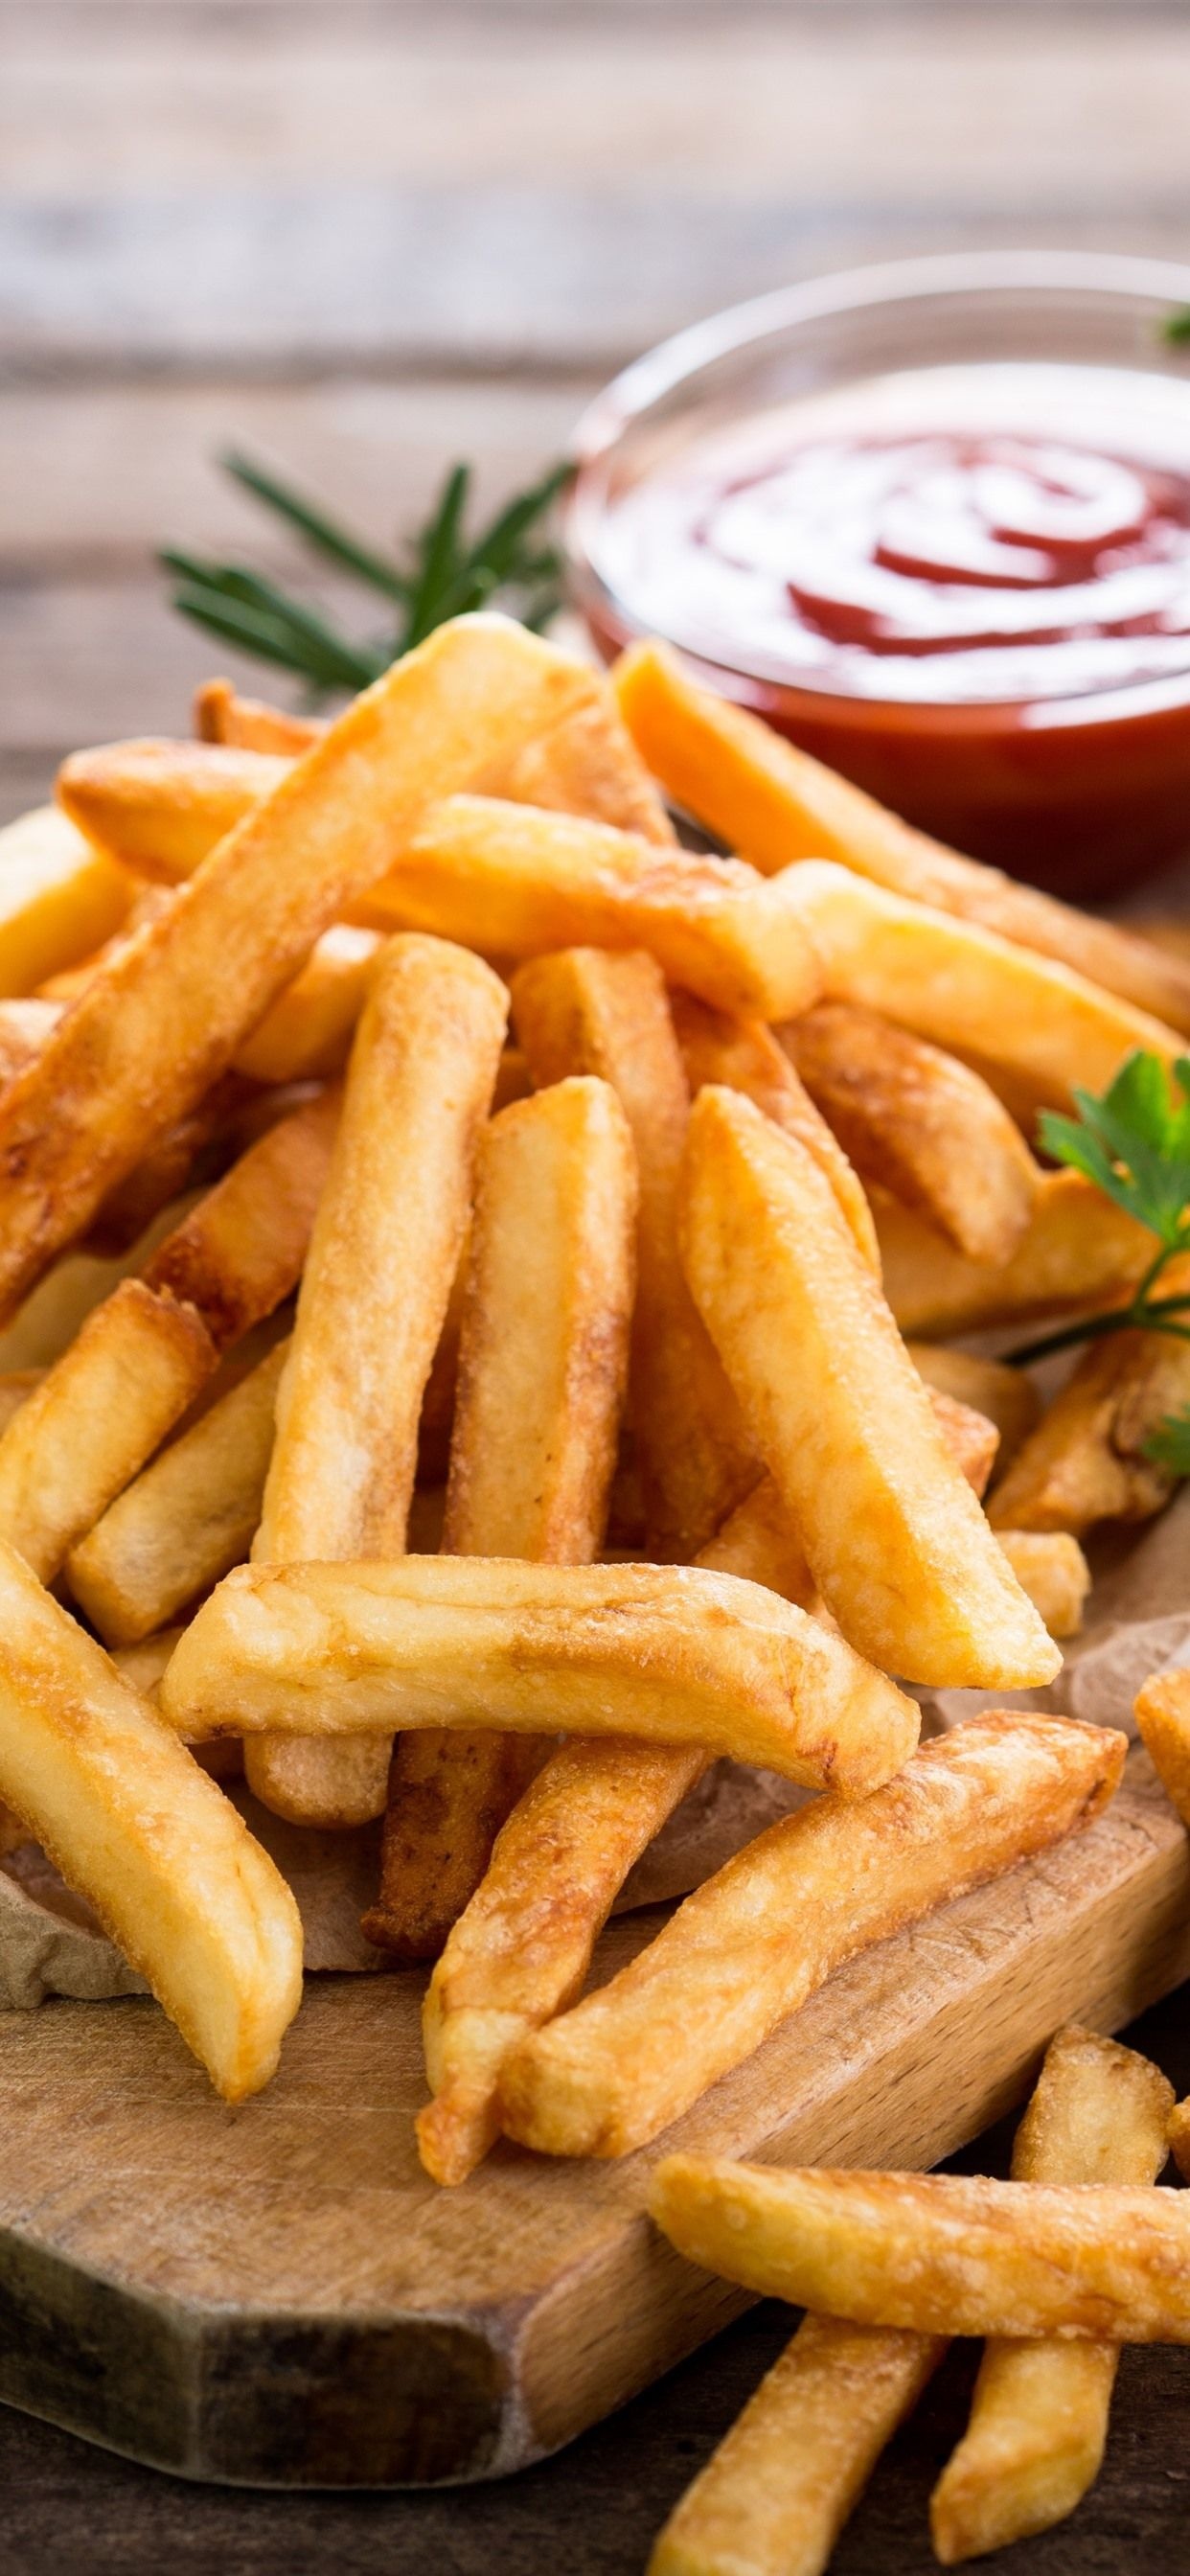 French Fries: Cut into different shapes, such as wedges, curls, or thin strips. 1250x2690 HD Wallpaper.